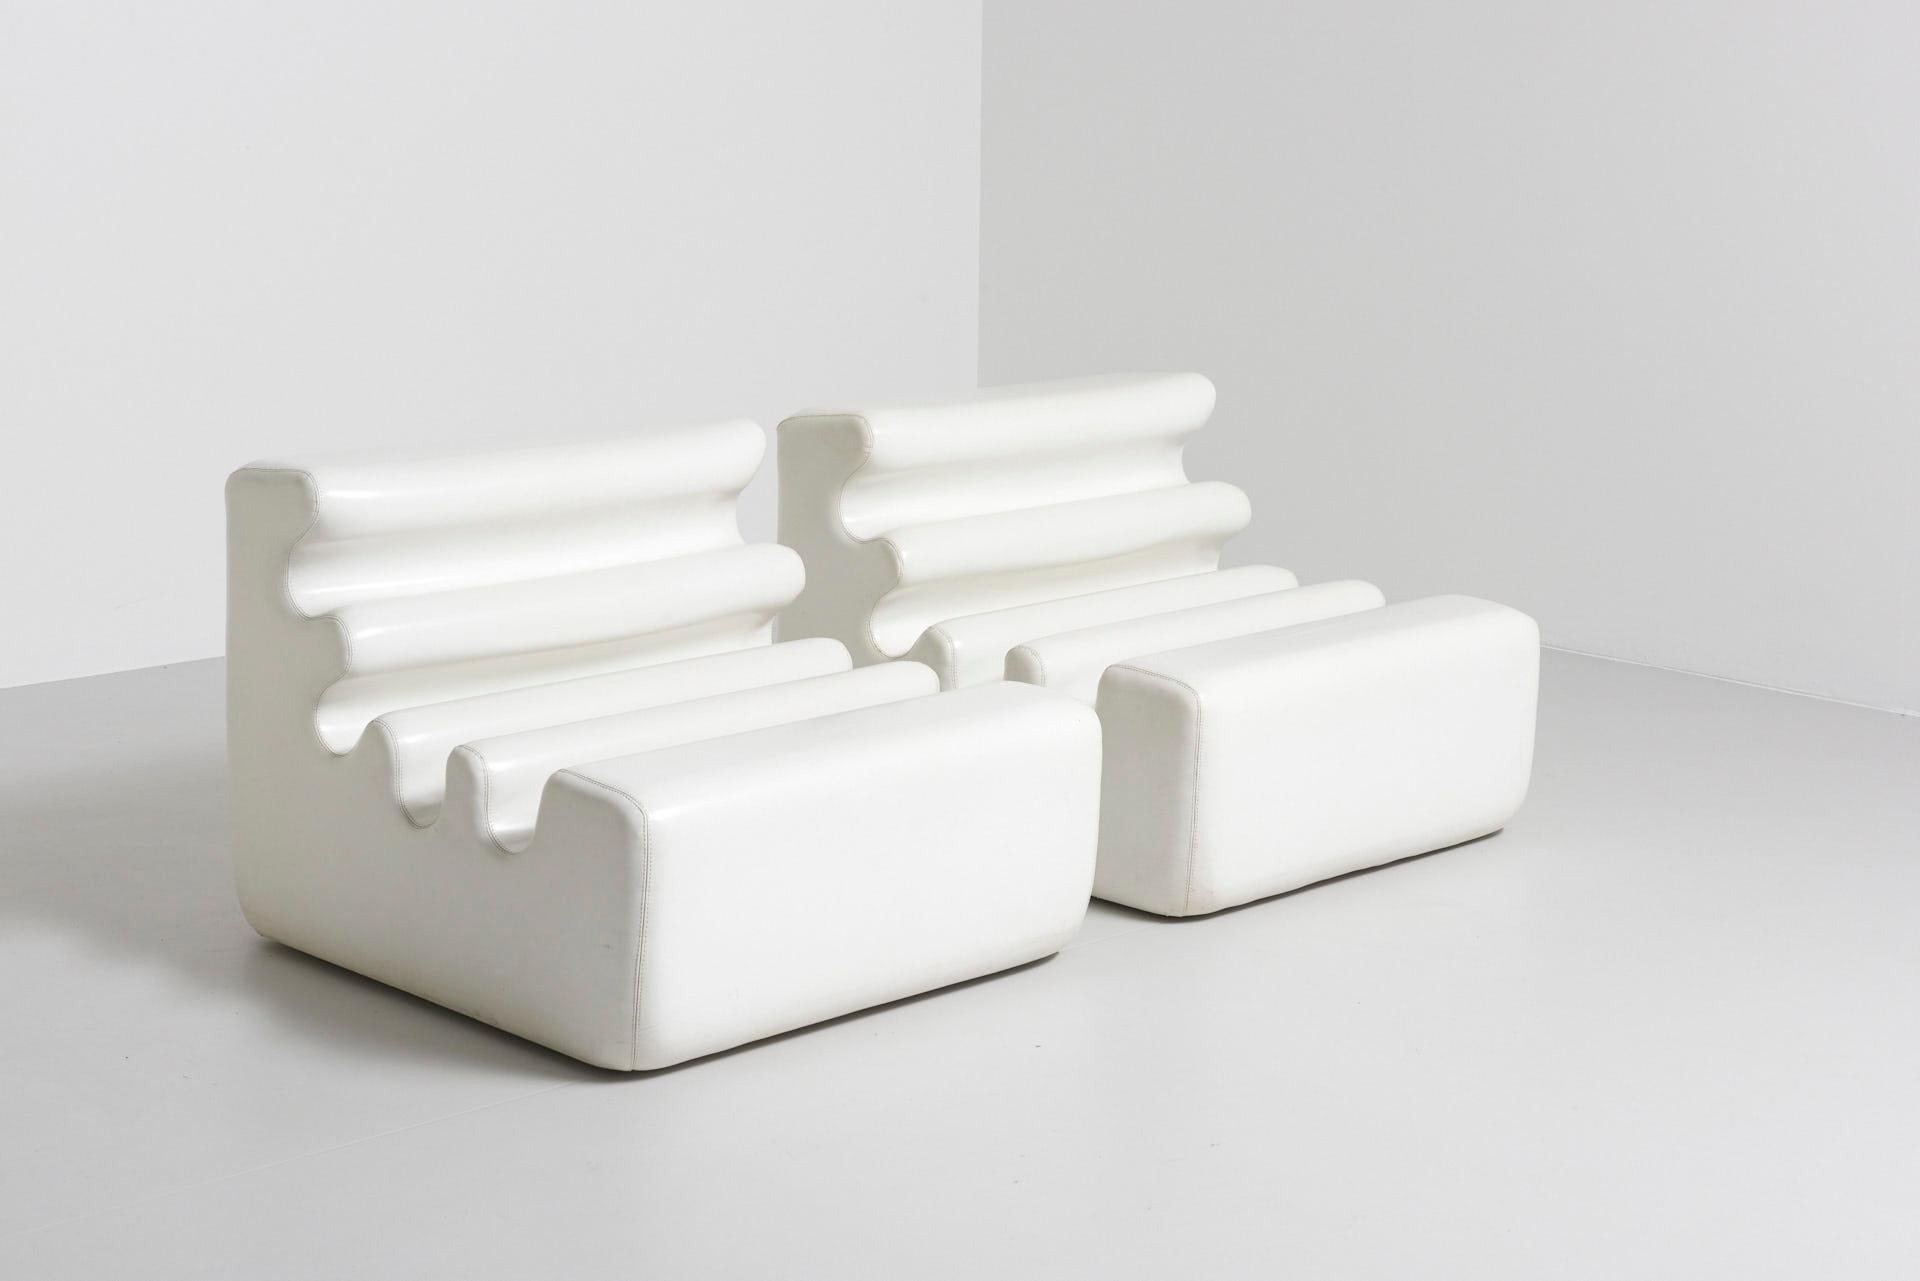 A set of 2 'Karelia' easy chairs in white. Designed in 1966 by the Finnish designer Liisi Beckmann for Zanotta. Polyurethan foam with vinyl cover. Made in Italy.